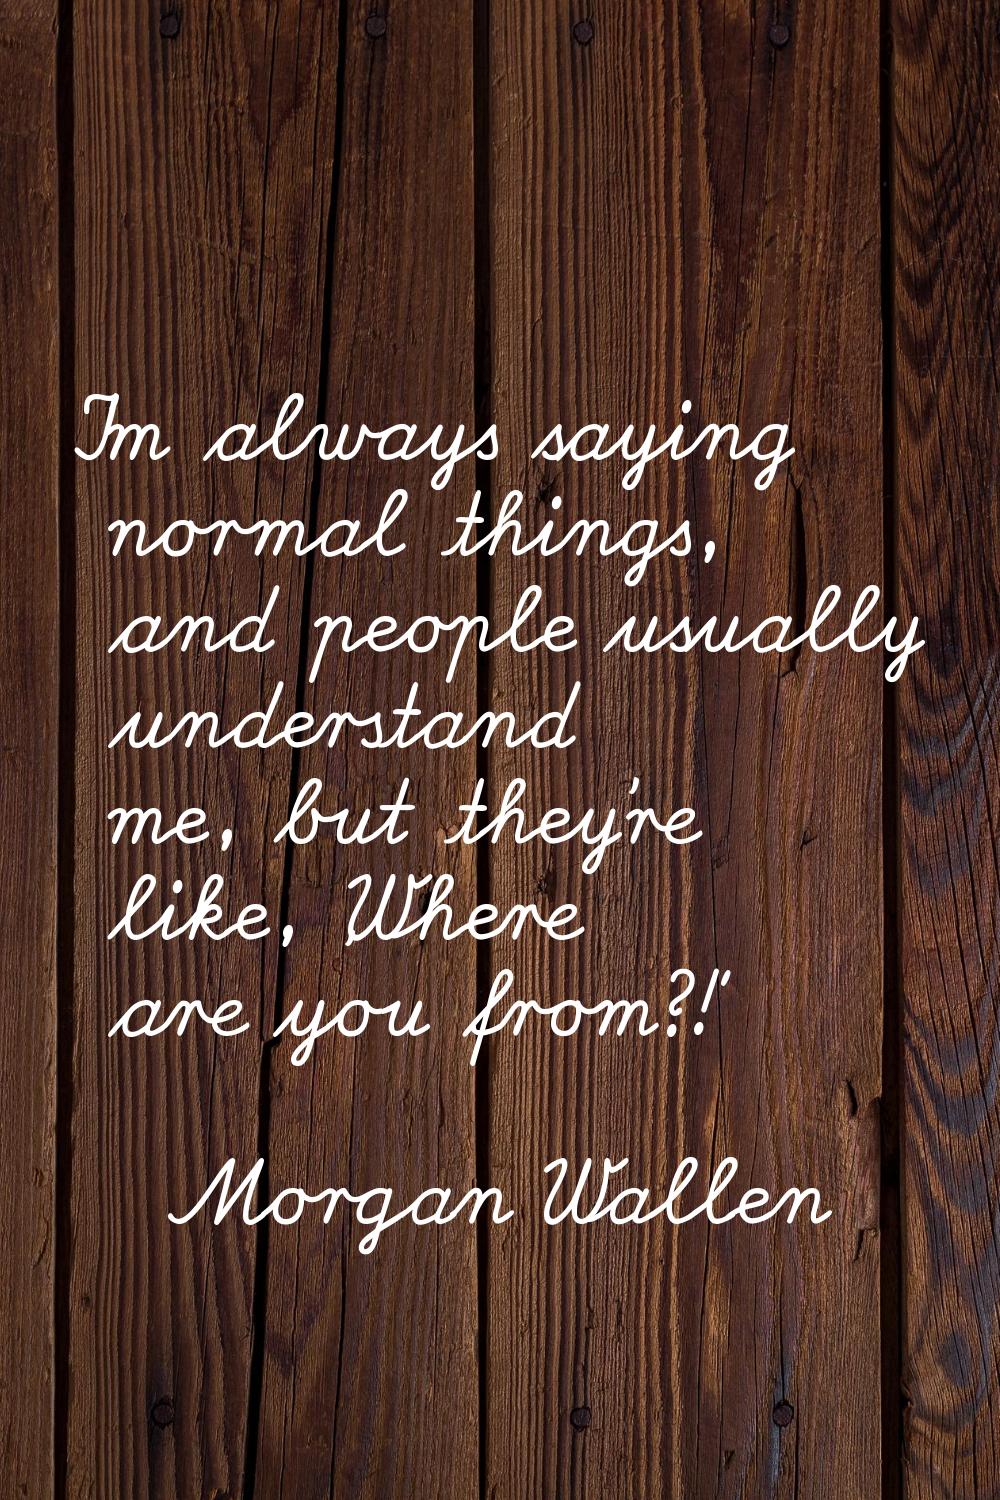 I'm always saying normal things, and people usually understand me, but they're like, 'Where are you